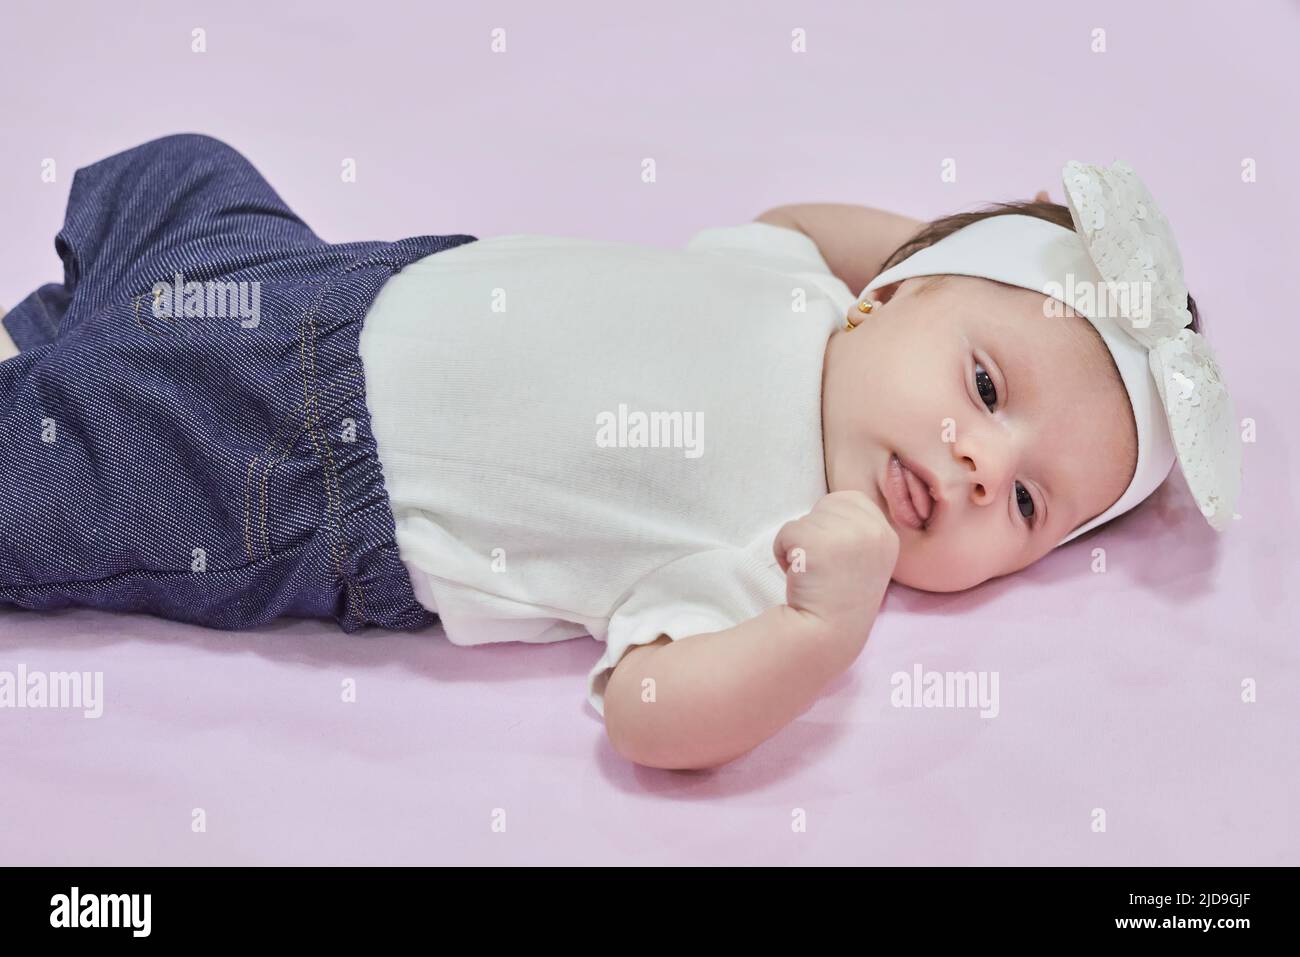 Baby Girl with white Flower Headband. 2-month-old baby girl. Stock Photo